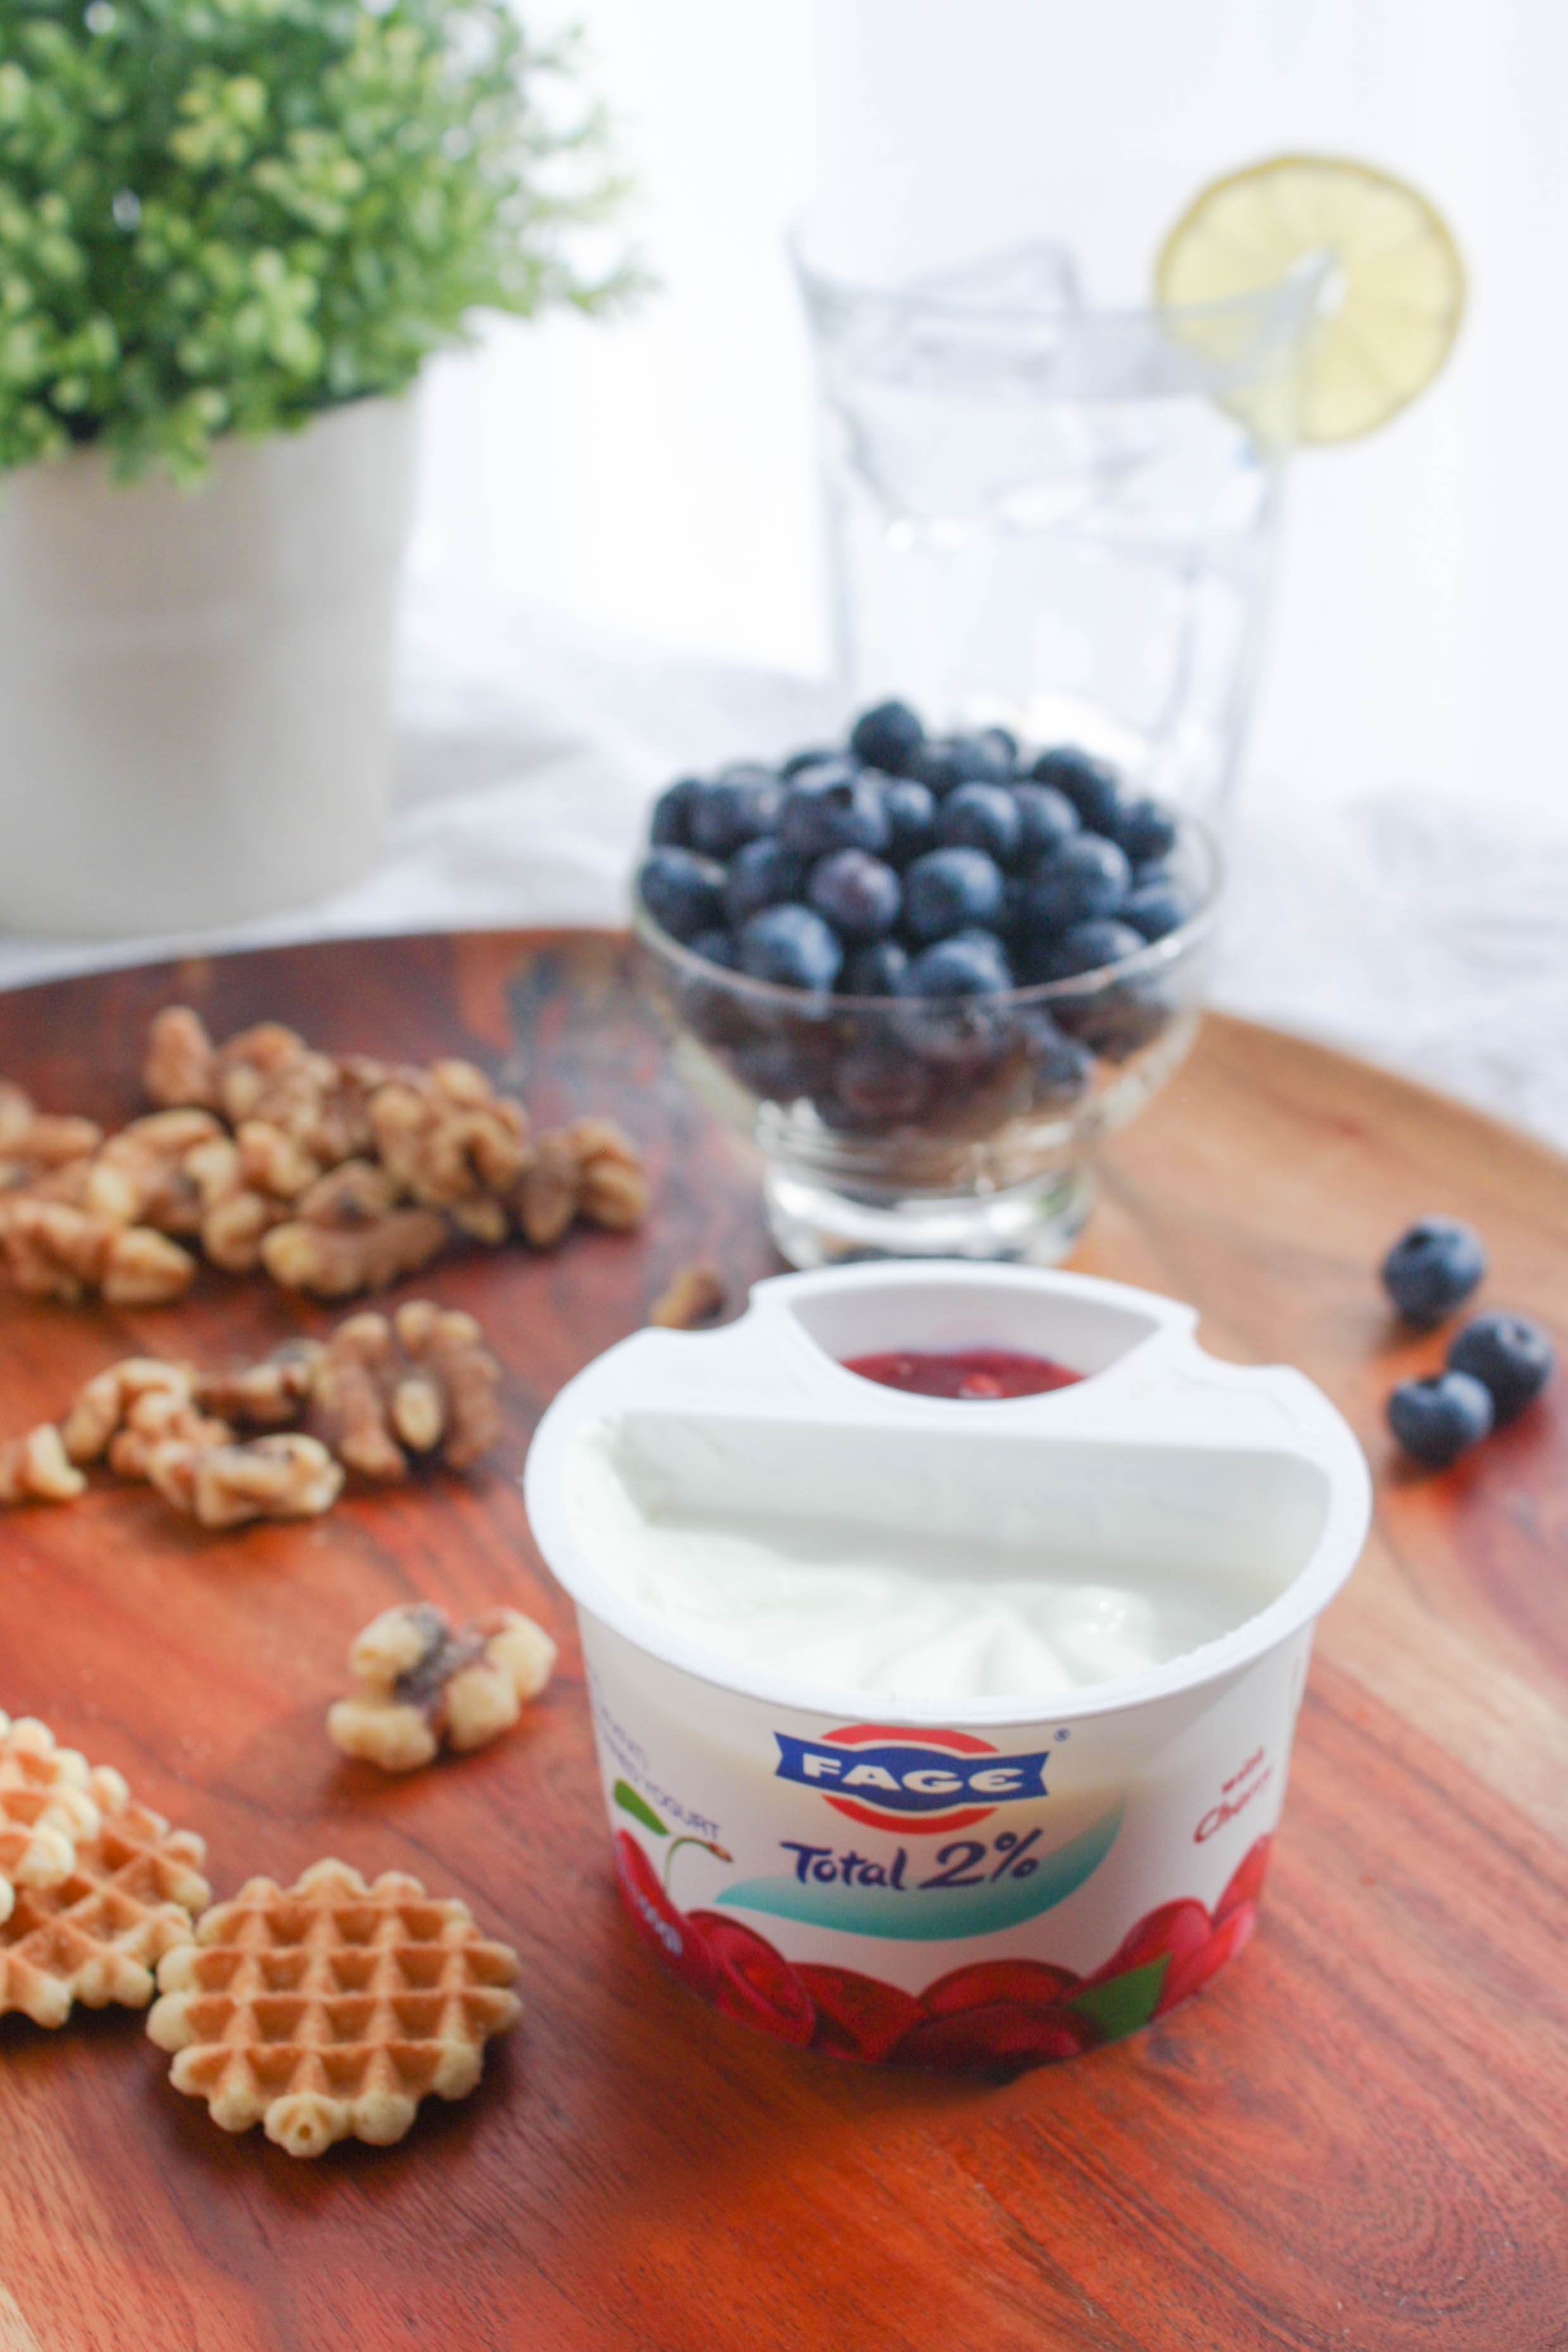 FAGE Total Split Cups make a wonderful snack option, as does roasted garlic and sun-dried tomato hummus. FAGE Total Split Cups work well for breakfast, too